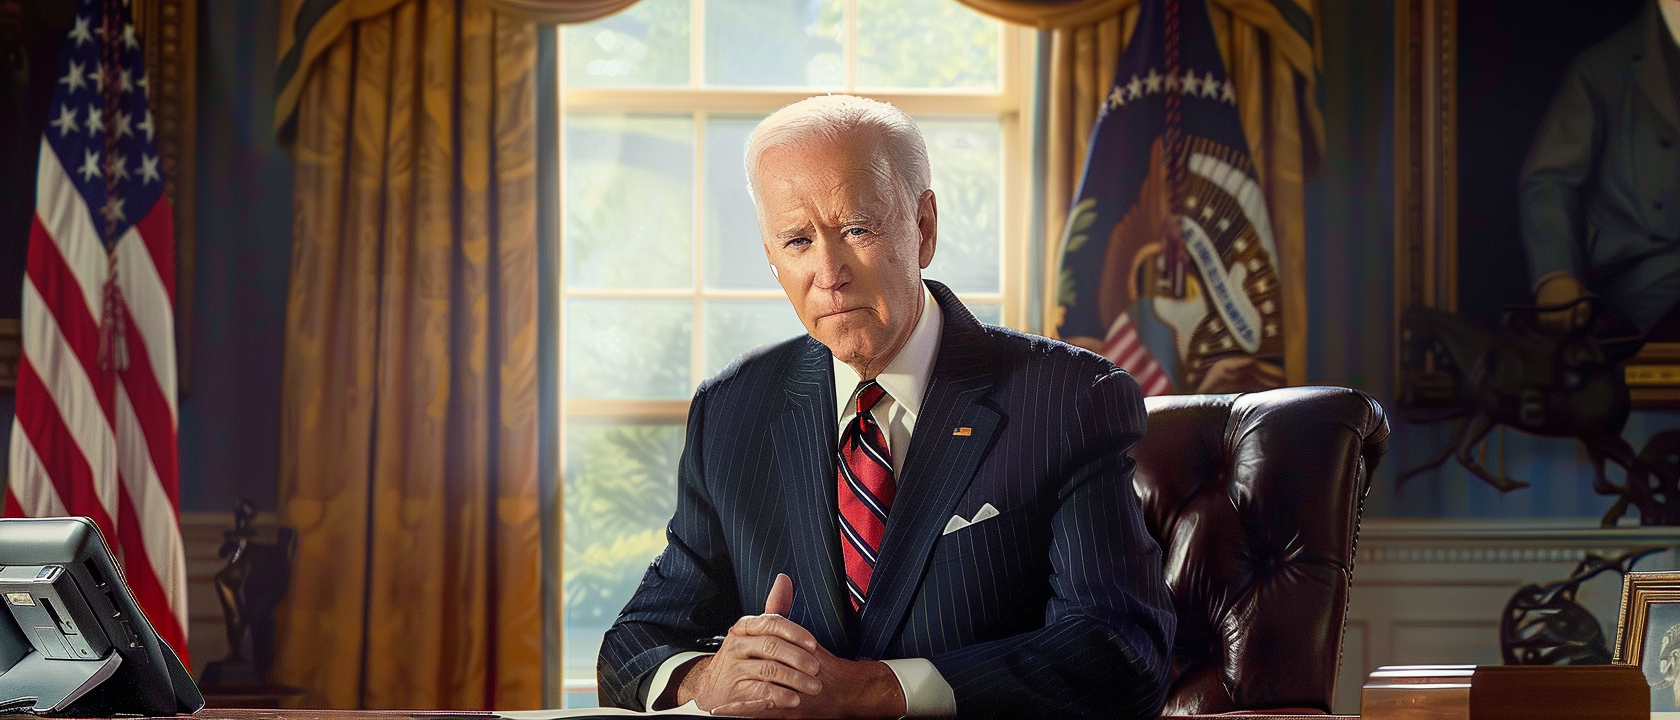 President Biden Announces Student Loan Cancellation Plan with Focus on 'Racial Equity'